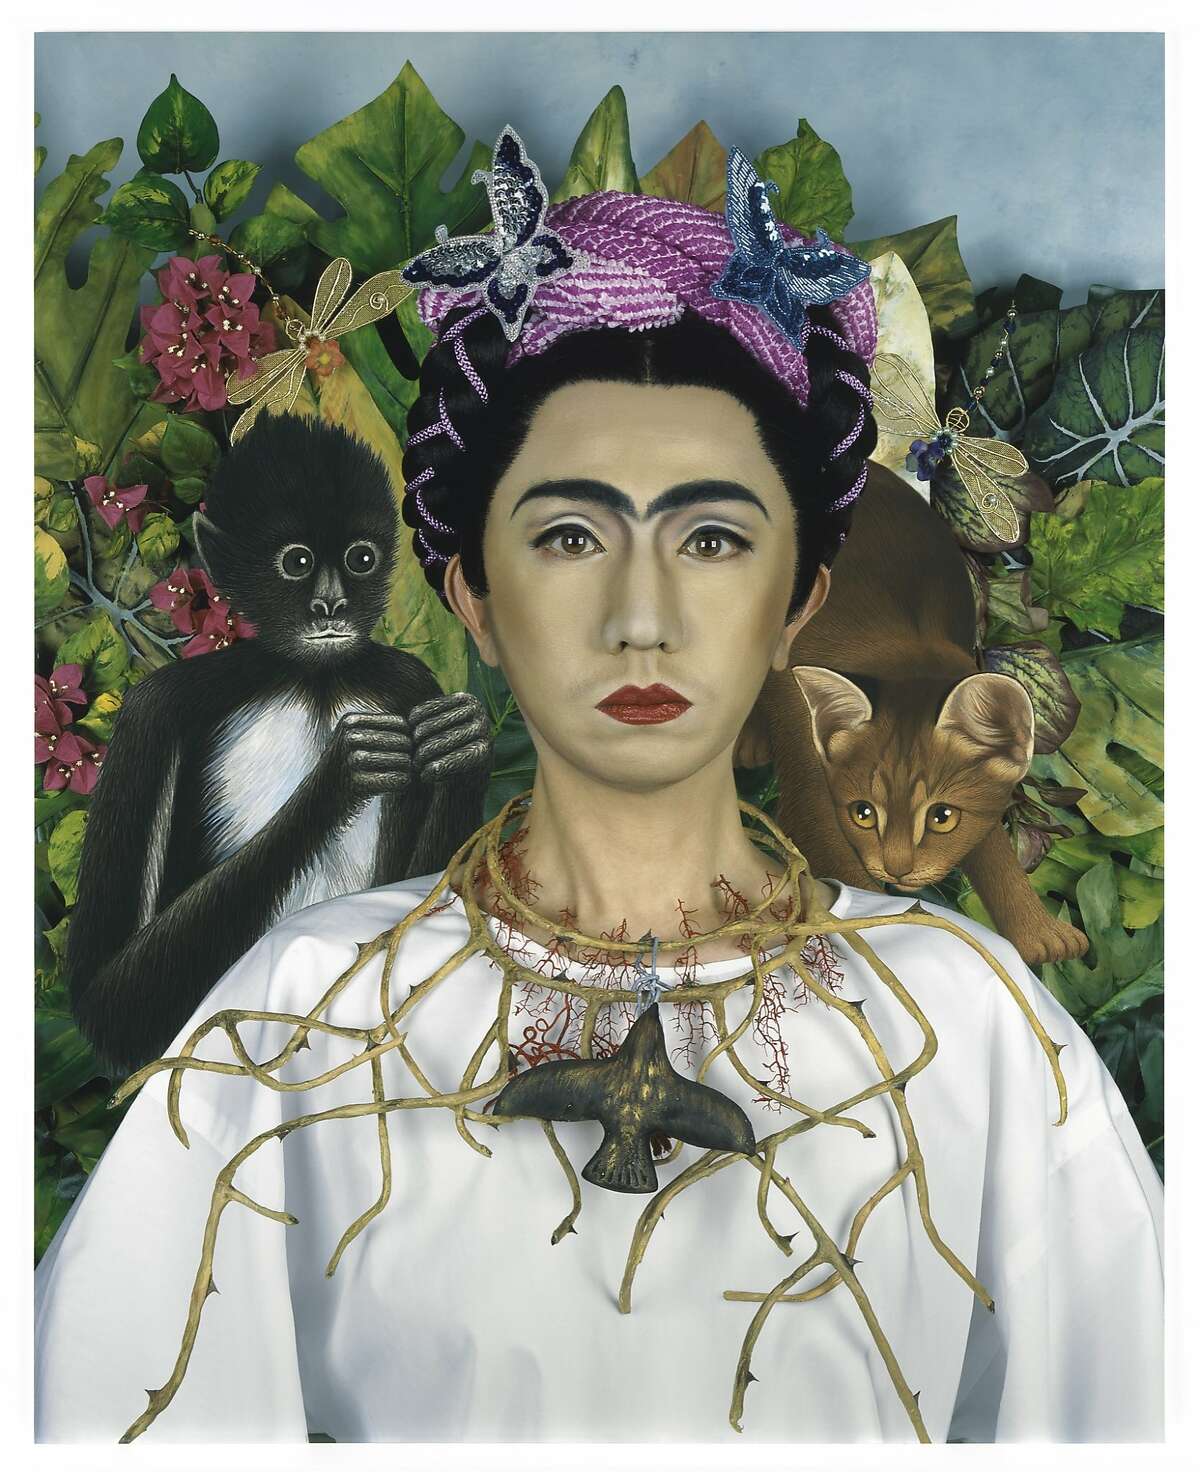 "An Inner Dialogue With Frida Kahlo (Collar of Thorns)," by Yasumasa Morimura, 2001, chromogenic, from "Japanese Photography From Postwar to Now," SFMoma